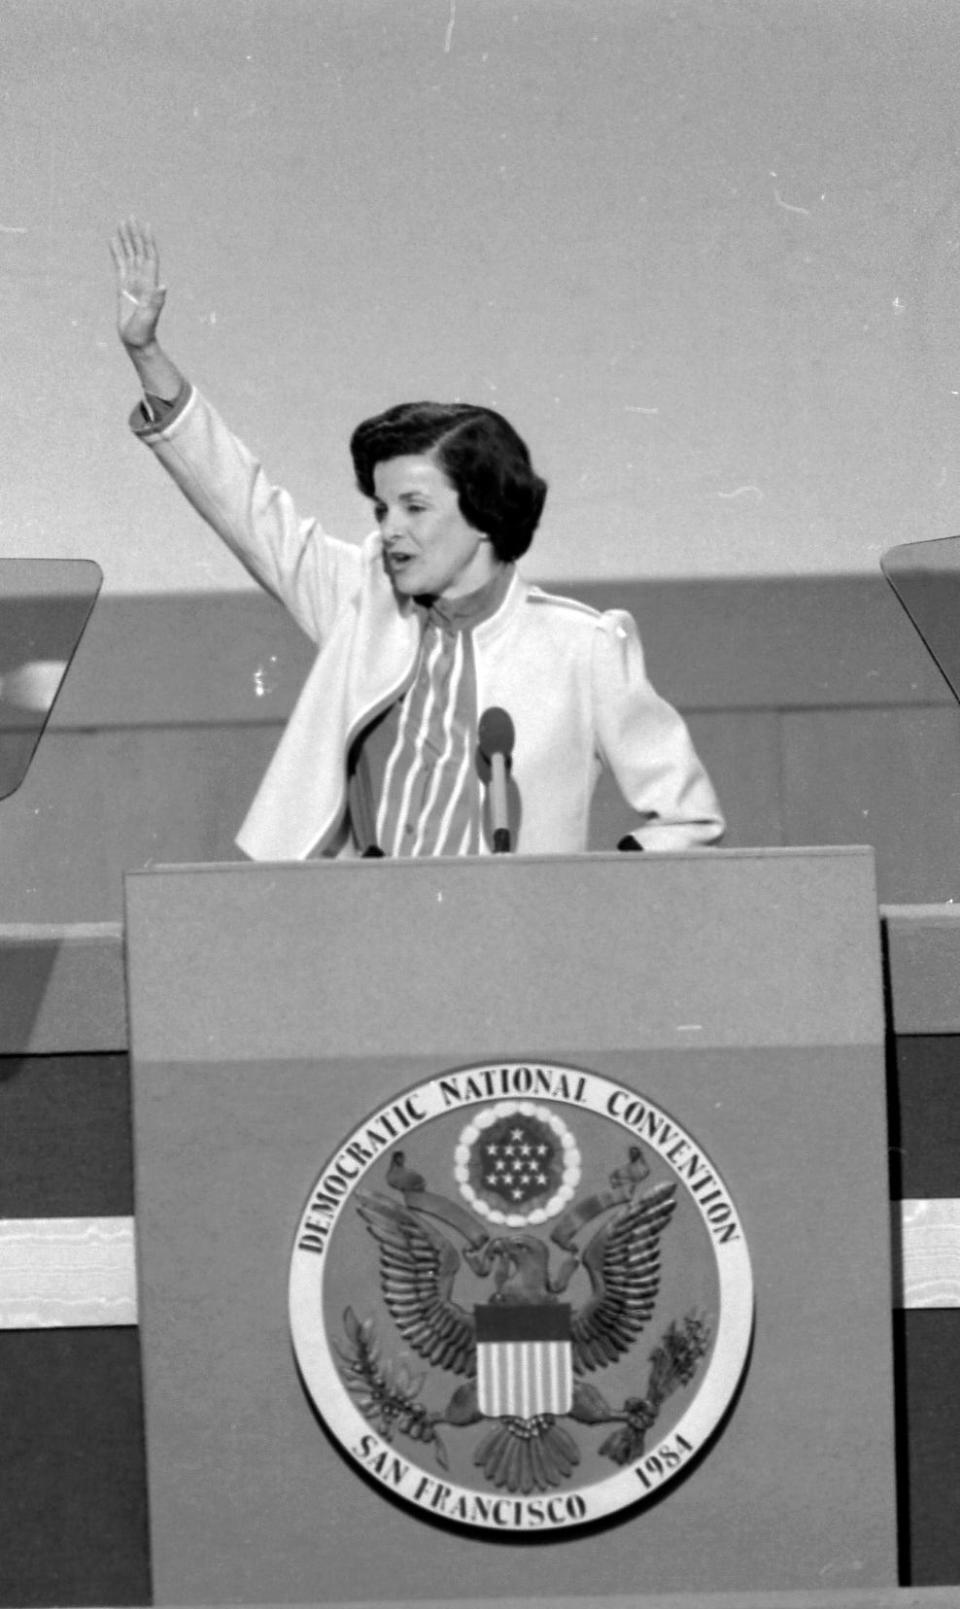 Mayor Dianne Feinstein at the 1984 Democratic National Convention held at Moscone Center in San Francisco.